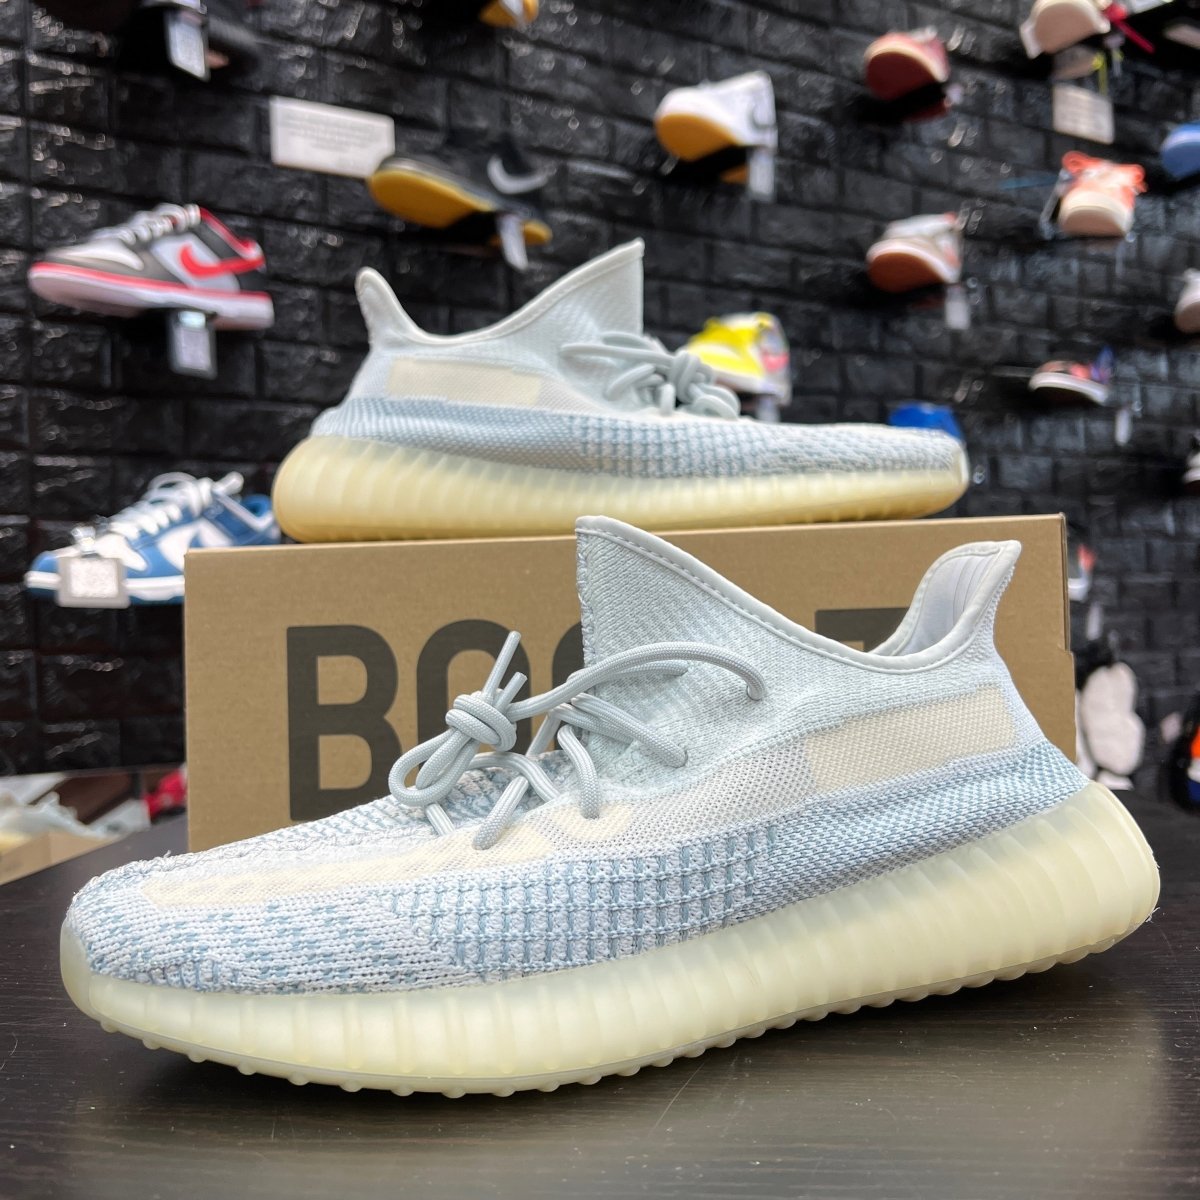 Yeezy Boost 350 V2 Cloud White - Gently Enjoyed (Used) Men 10.5 - Jawns Fire